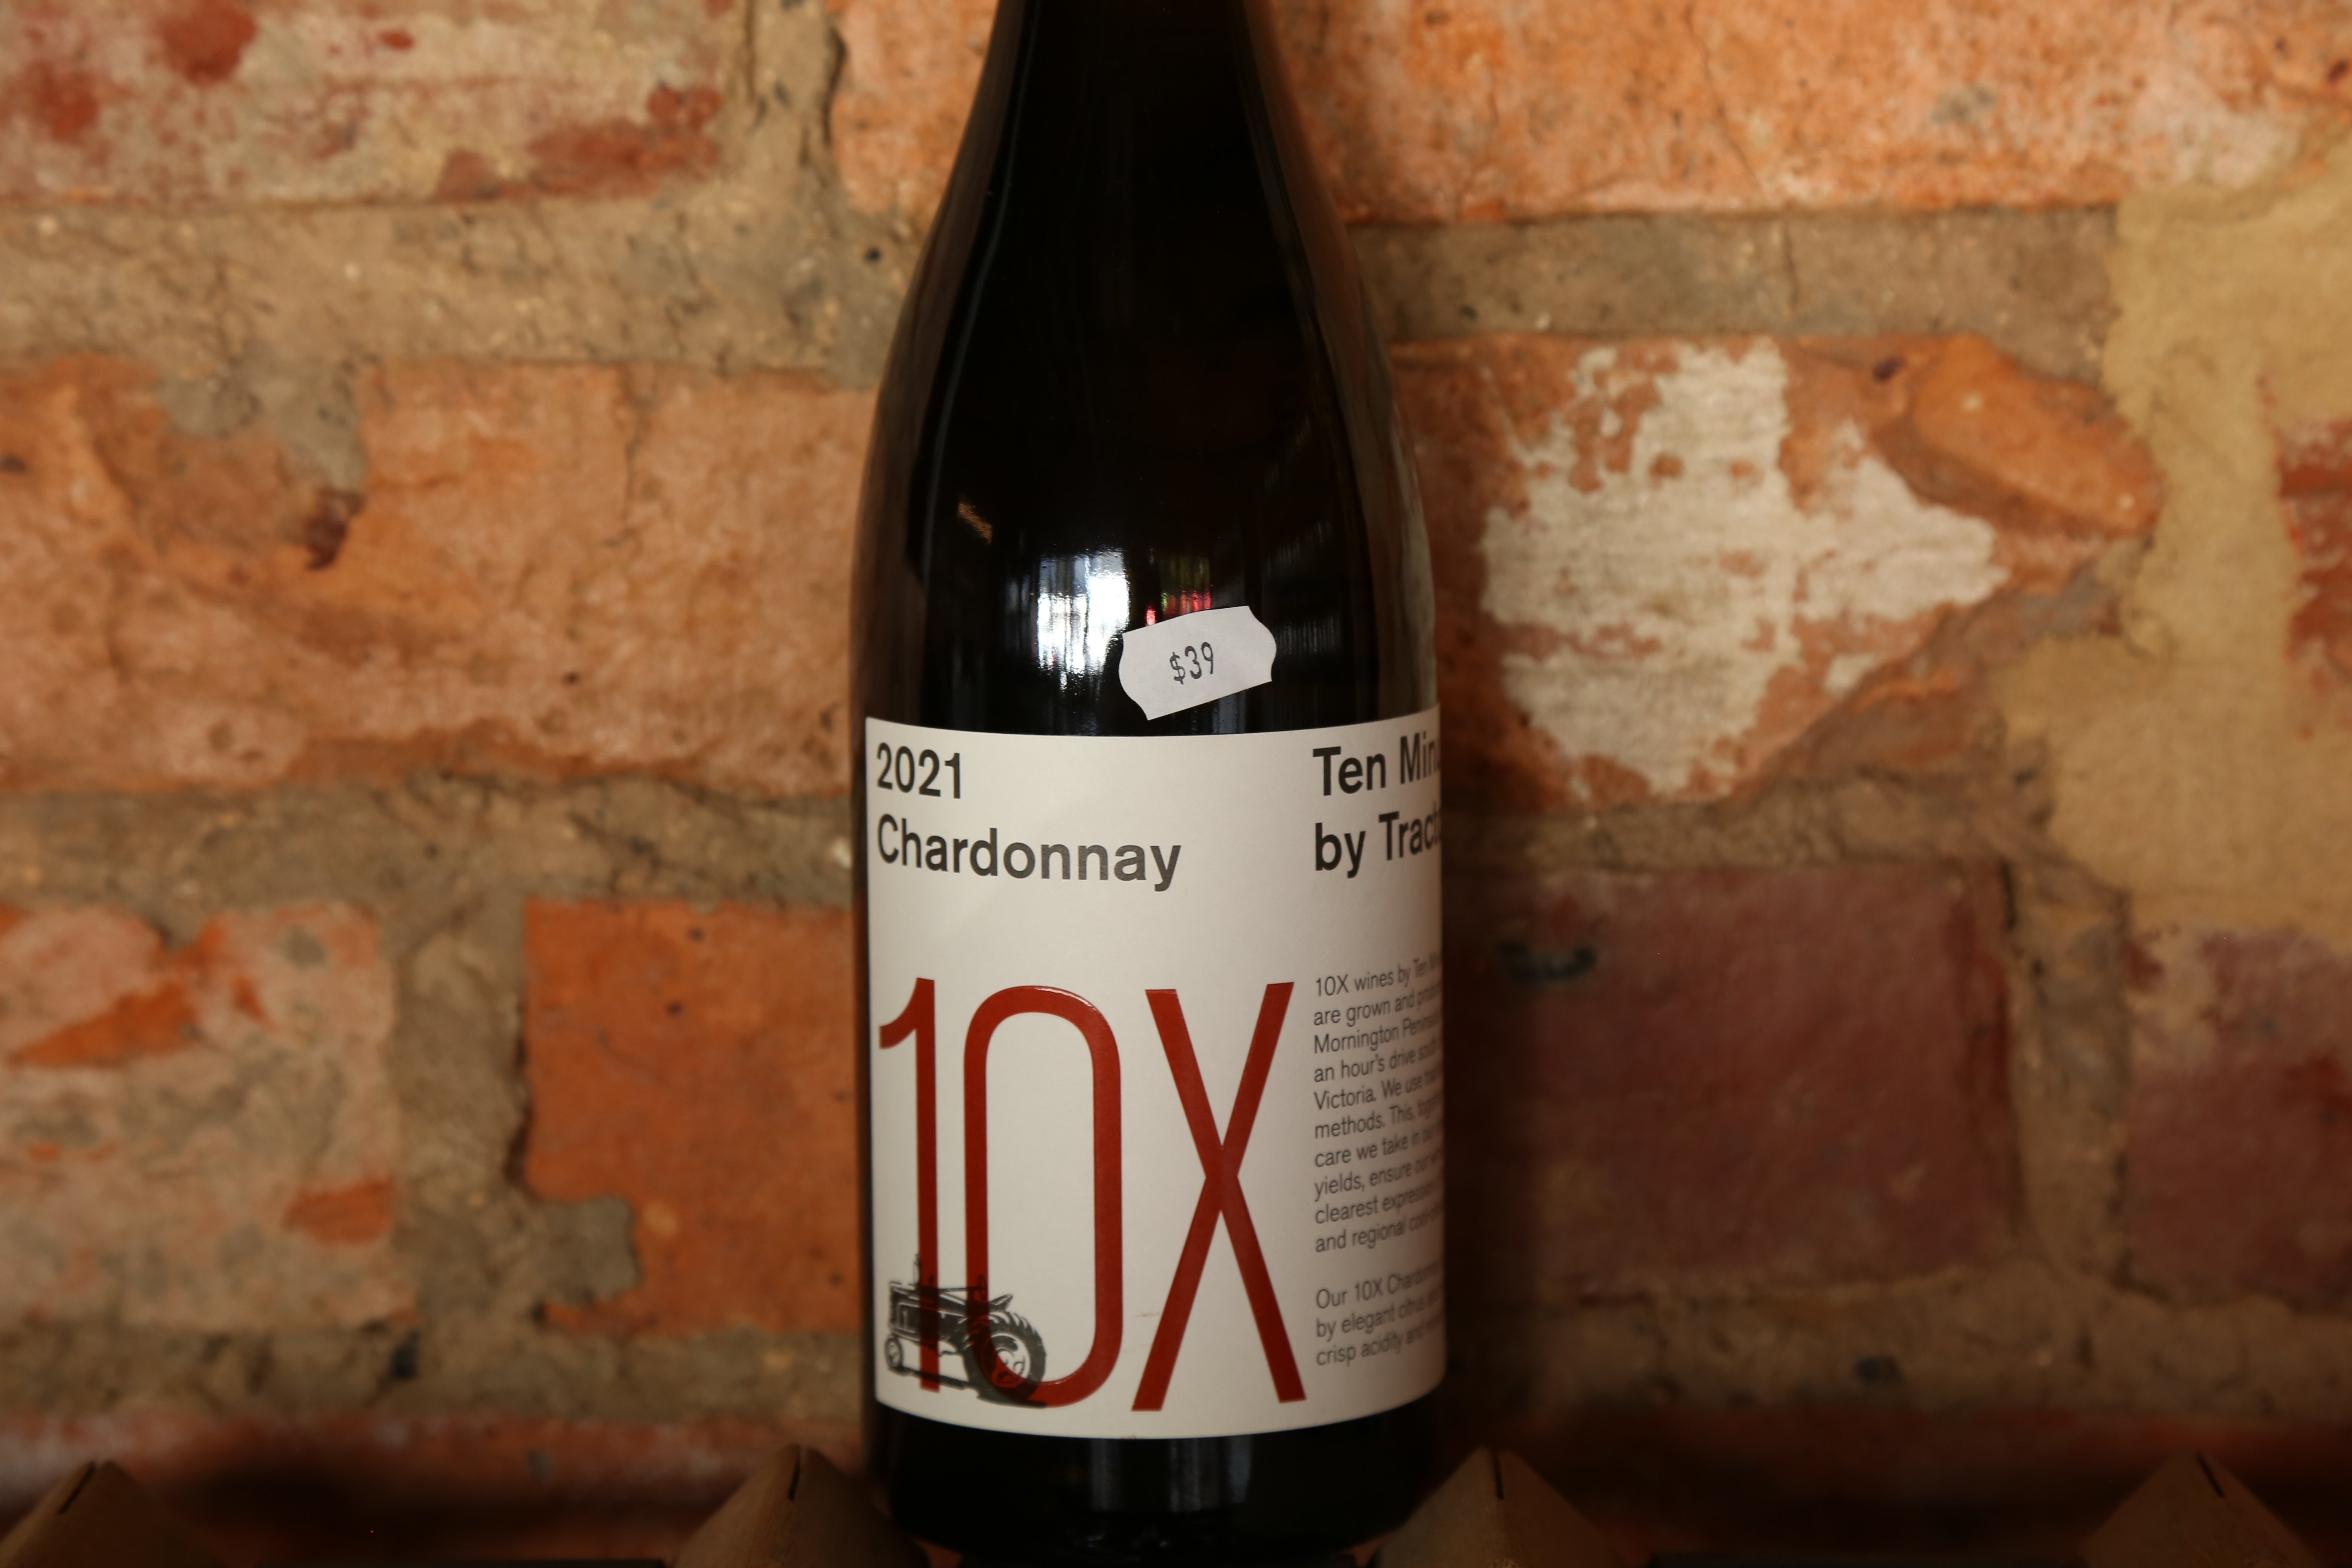 Ten Minutes by Tractor 10X Chardonnay 2021